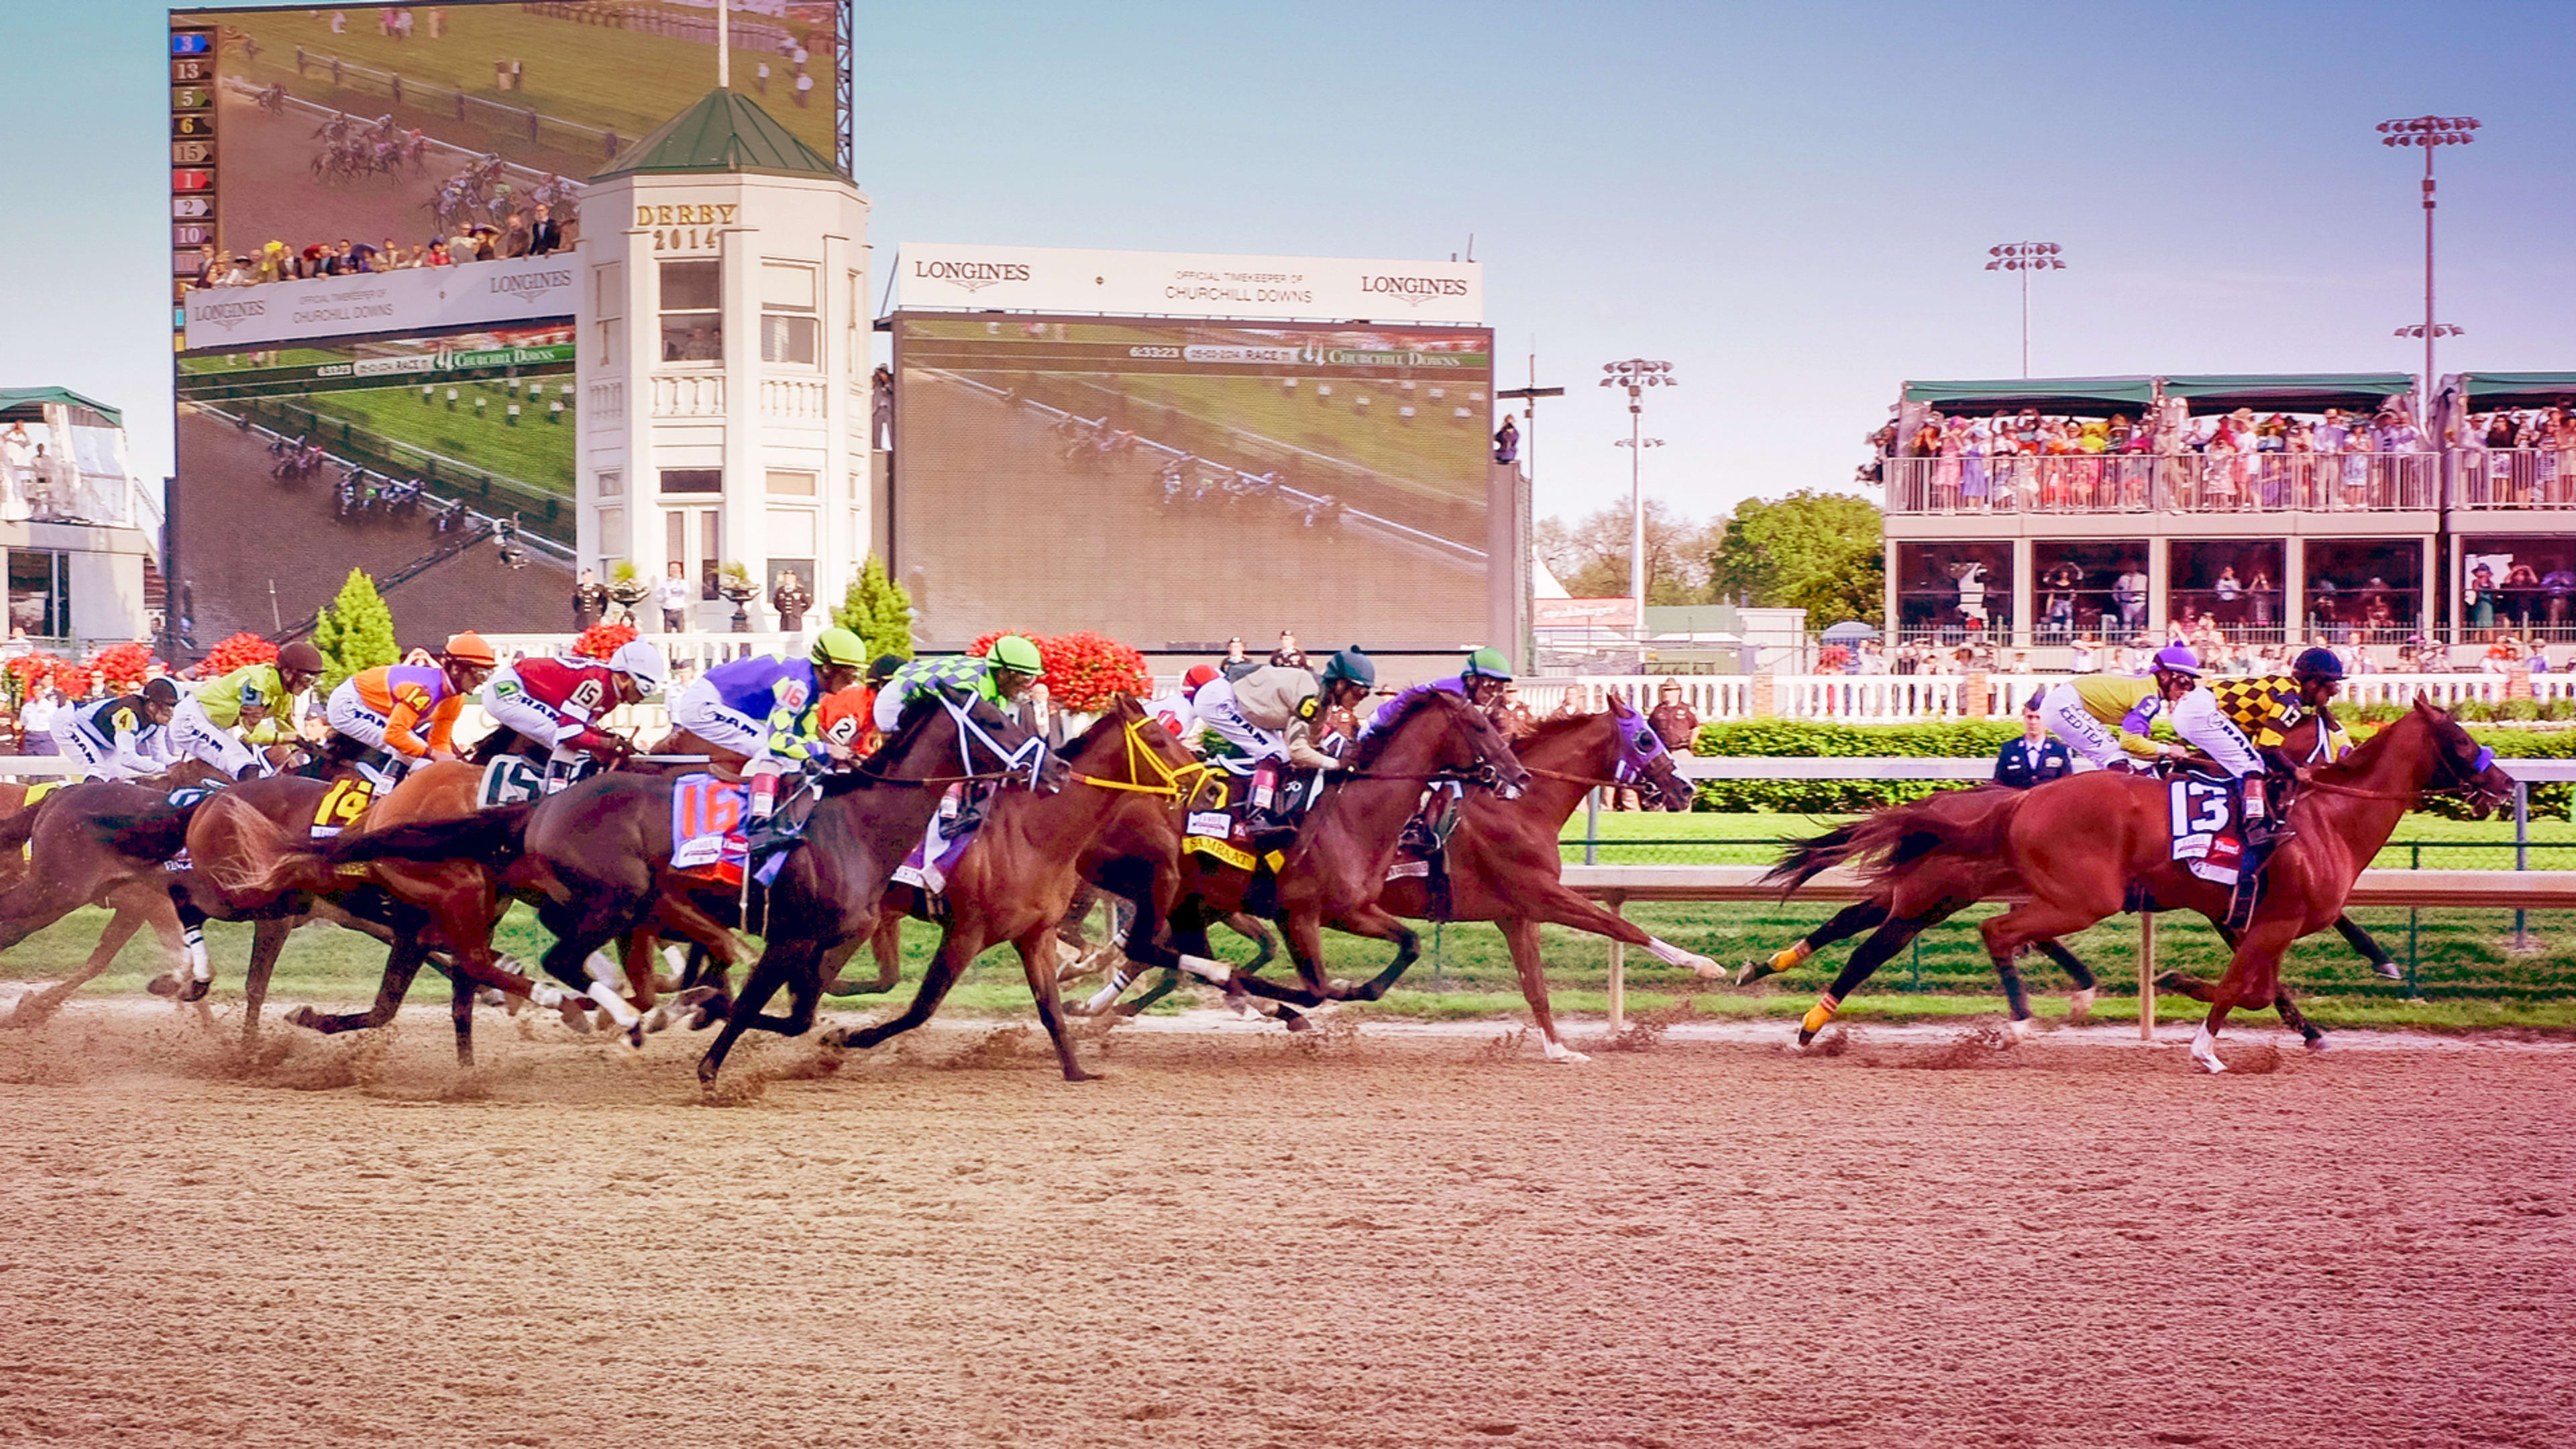 Watch Country House win the Kentucky Derby after Maximum Security’s historic disqualification